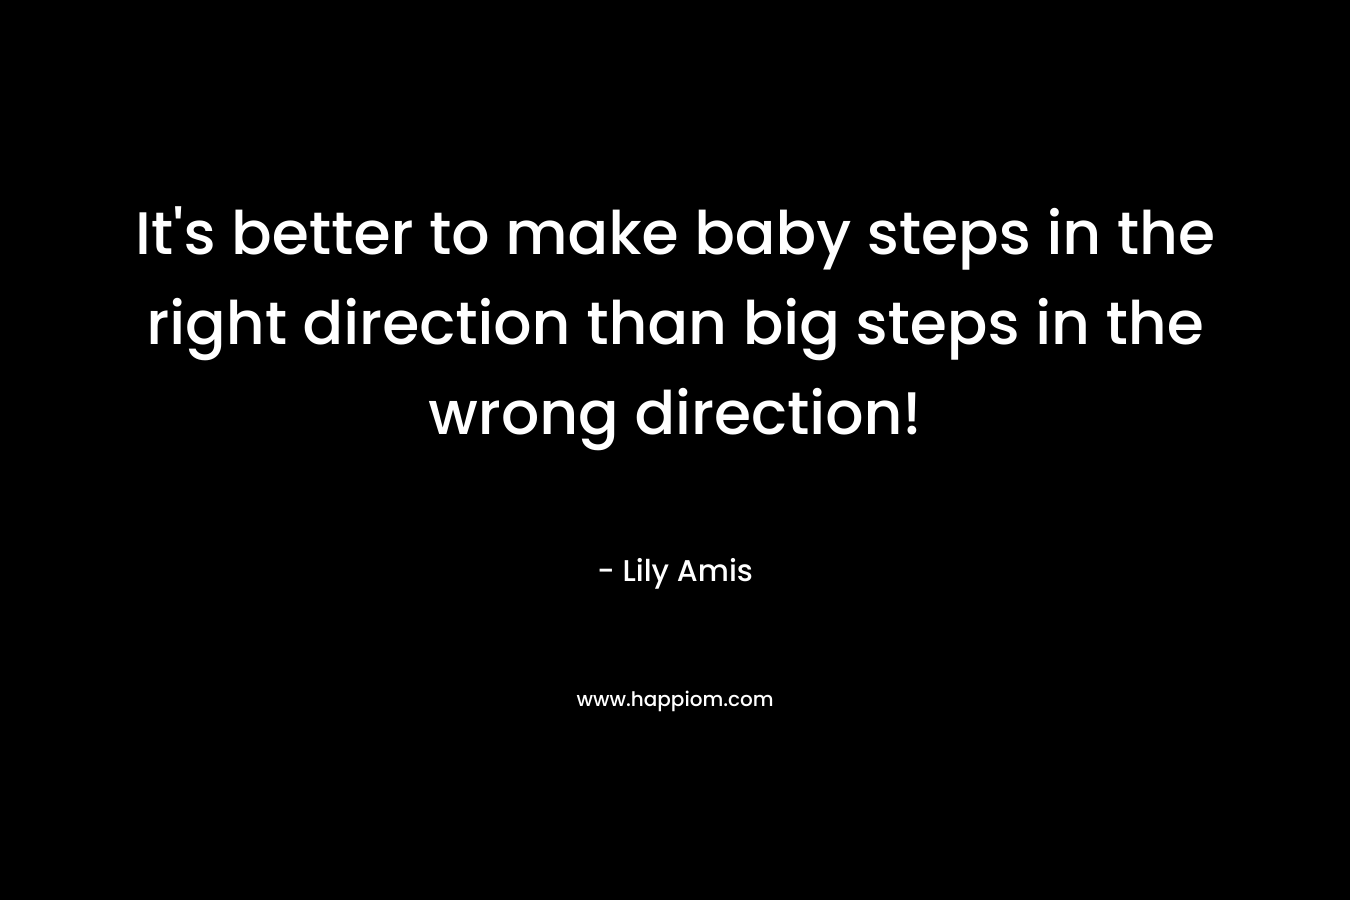 It's better to make baby steps in the right direction than big steps in the wrong direction!